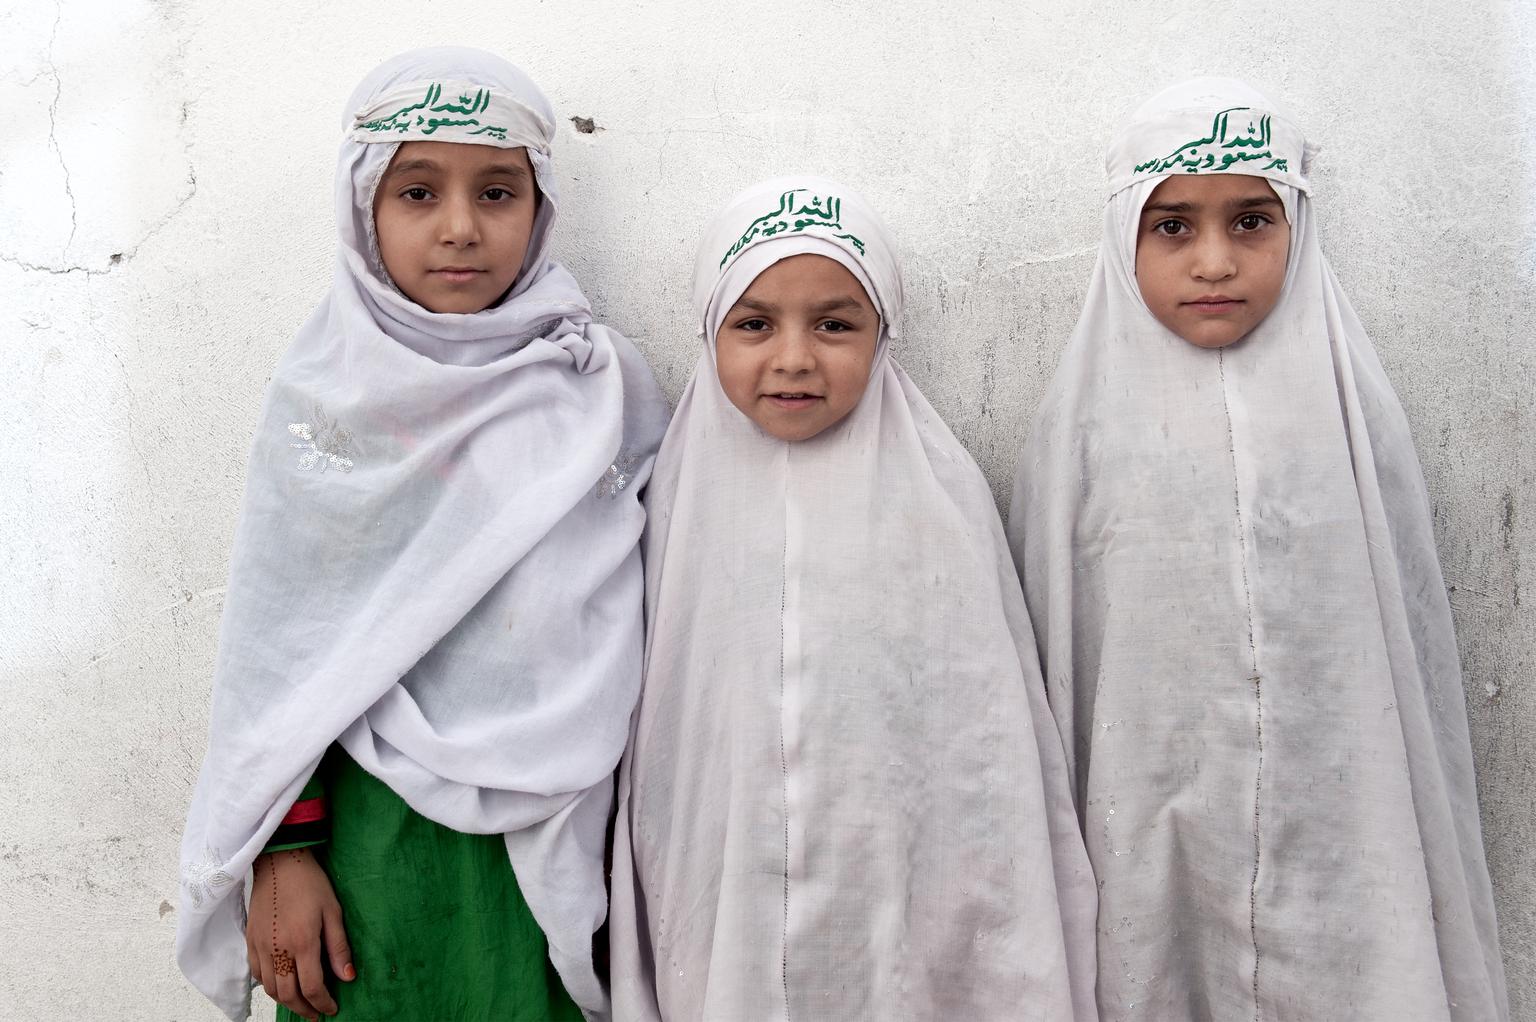 In July 2013 in Afghanistan, young girls stand by a wall at Peer Masoodia Madrasa in the southern city of Kandahar, capital of Kandahar Province. © UNICEF/NYHQ2013-0972/Dragaj